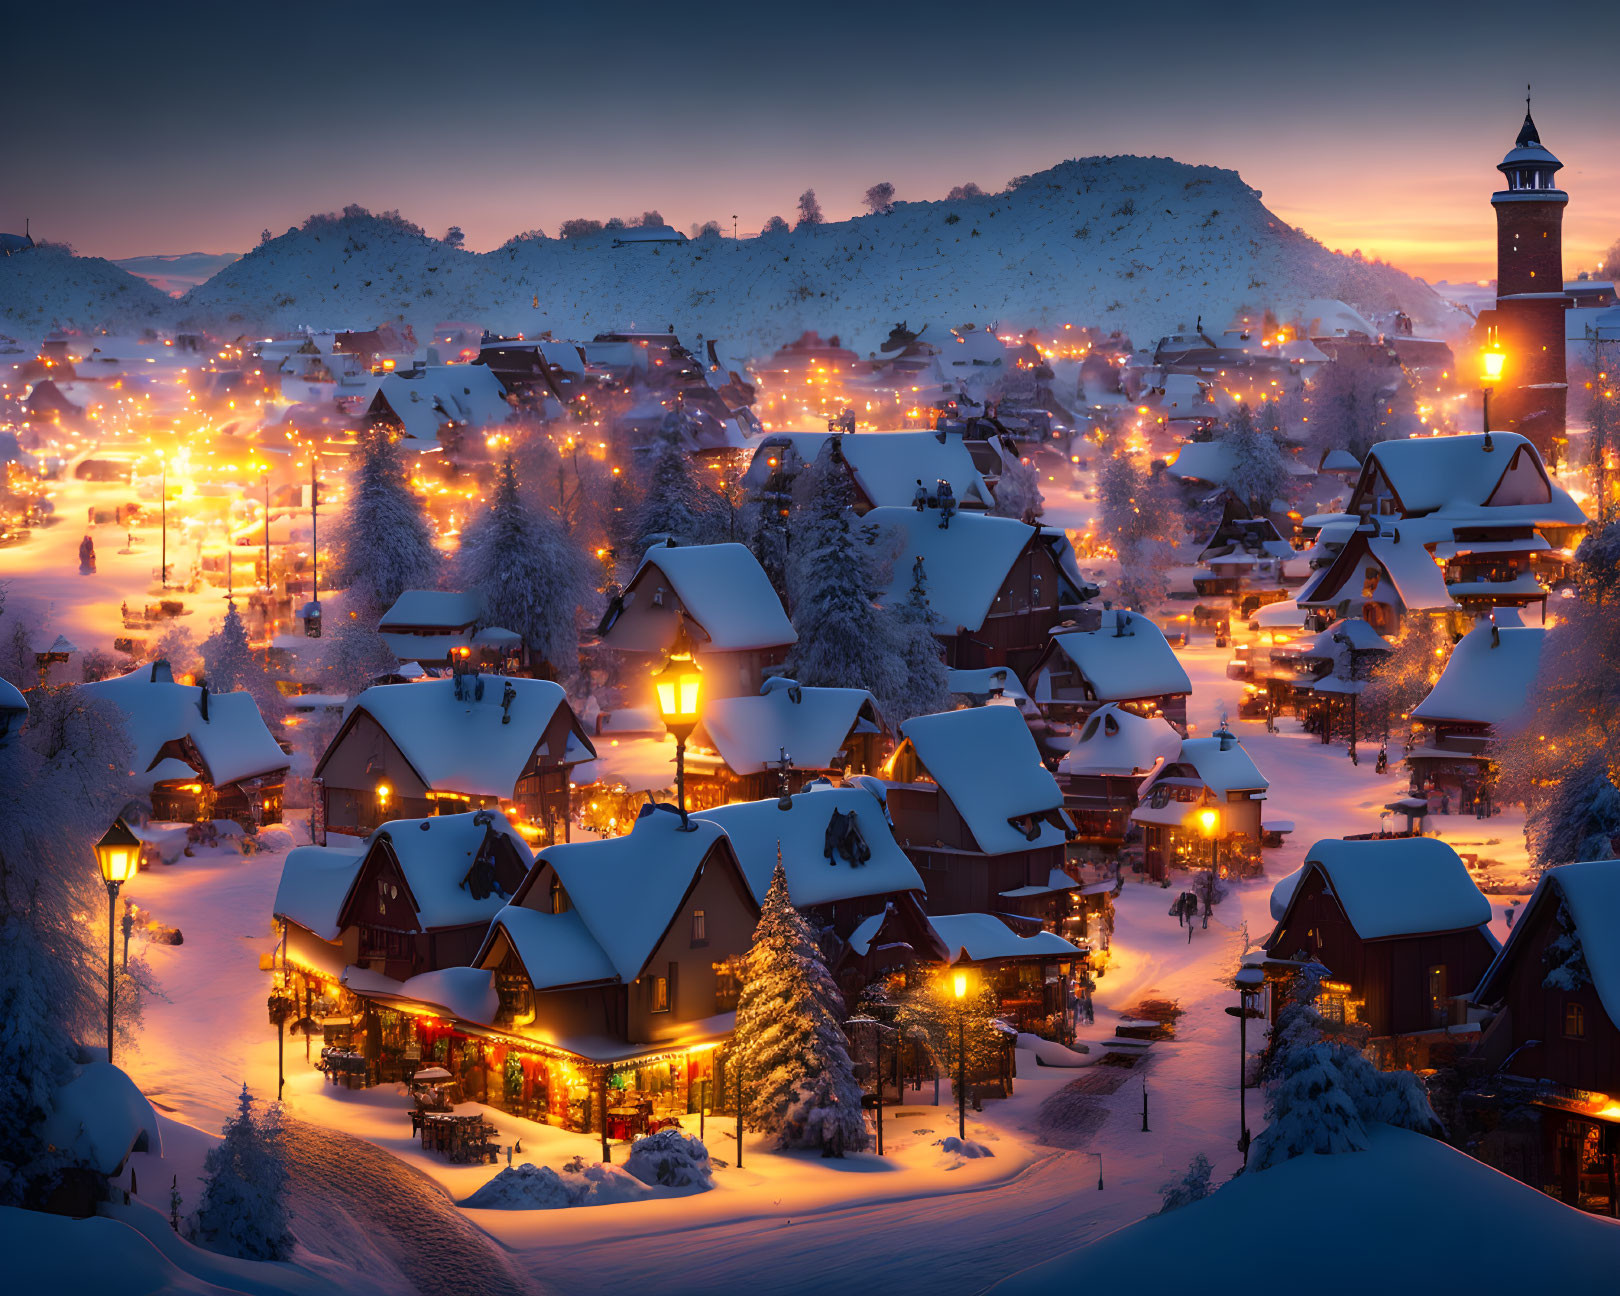 Snow-covered village at twilight with illuminated houses and streets, hilly landscape, clear sky